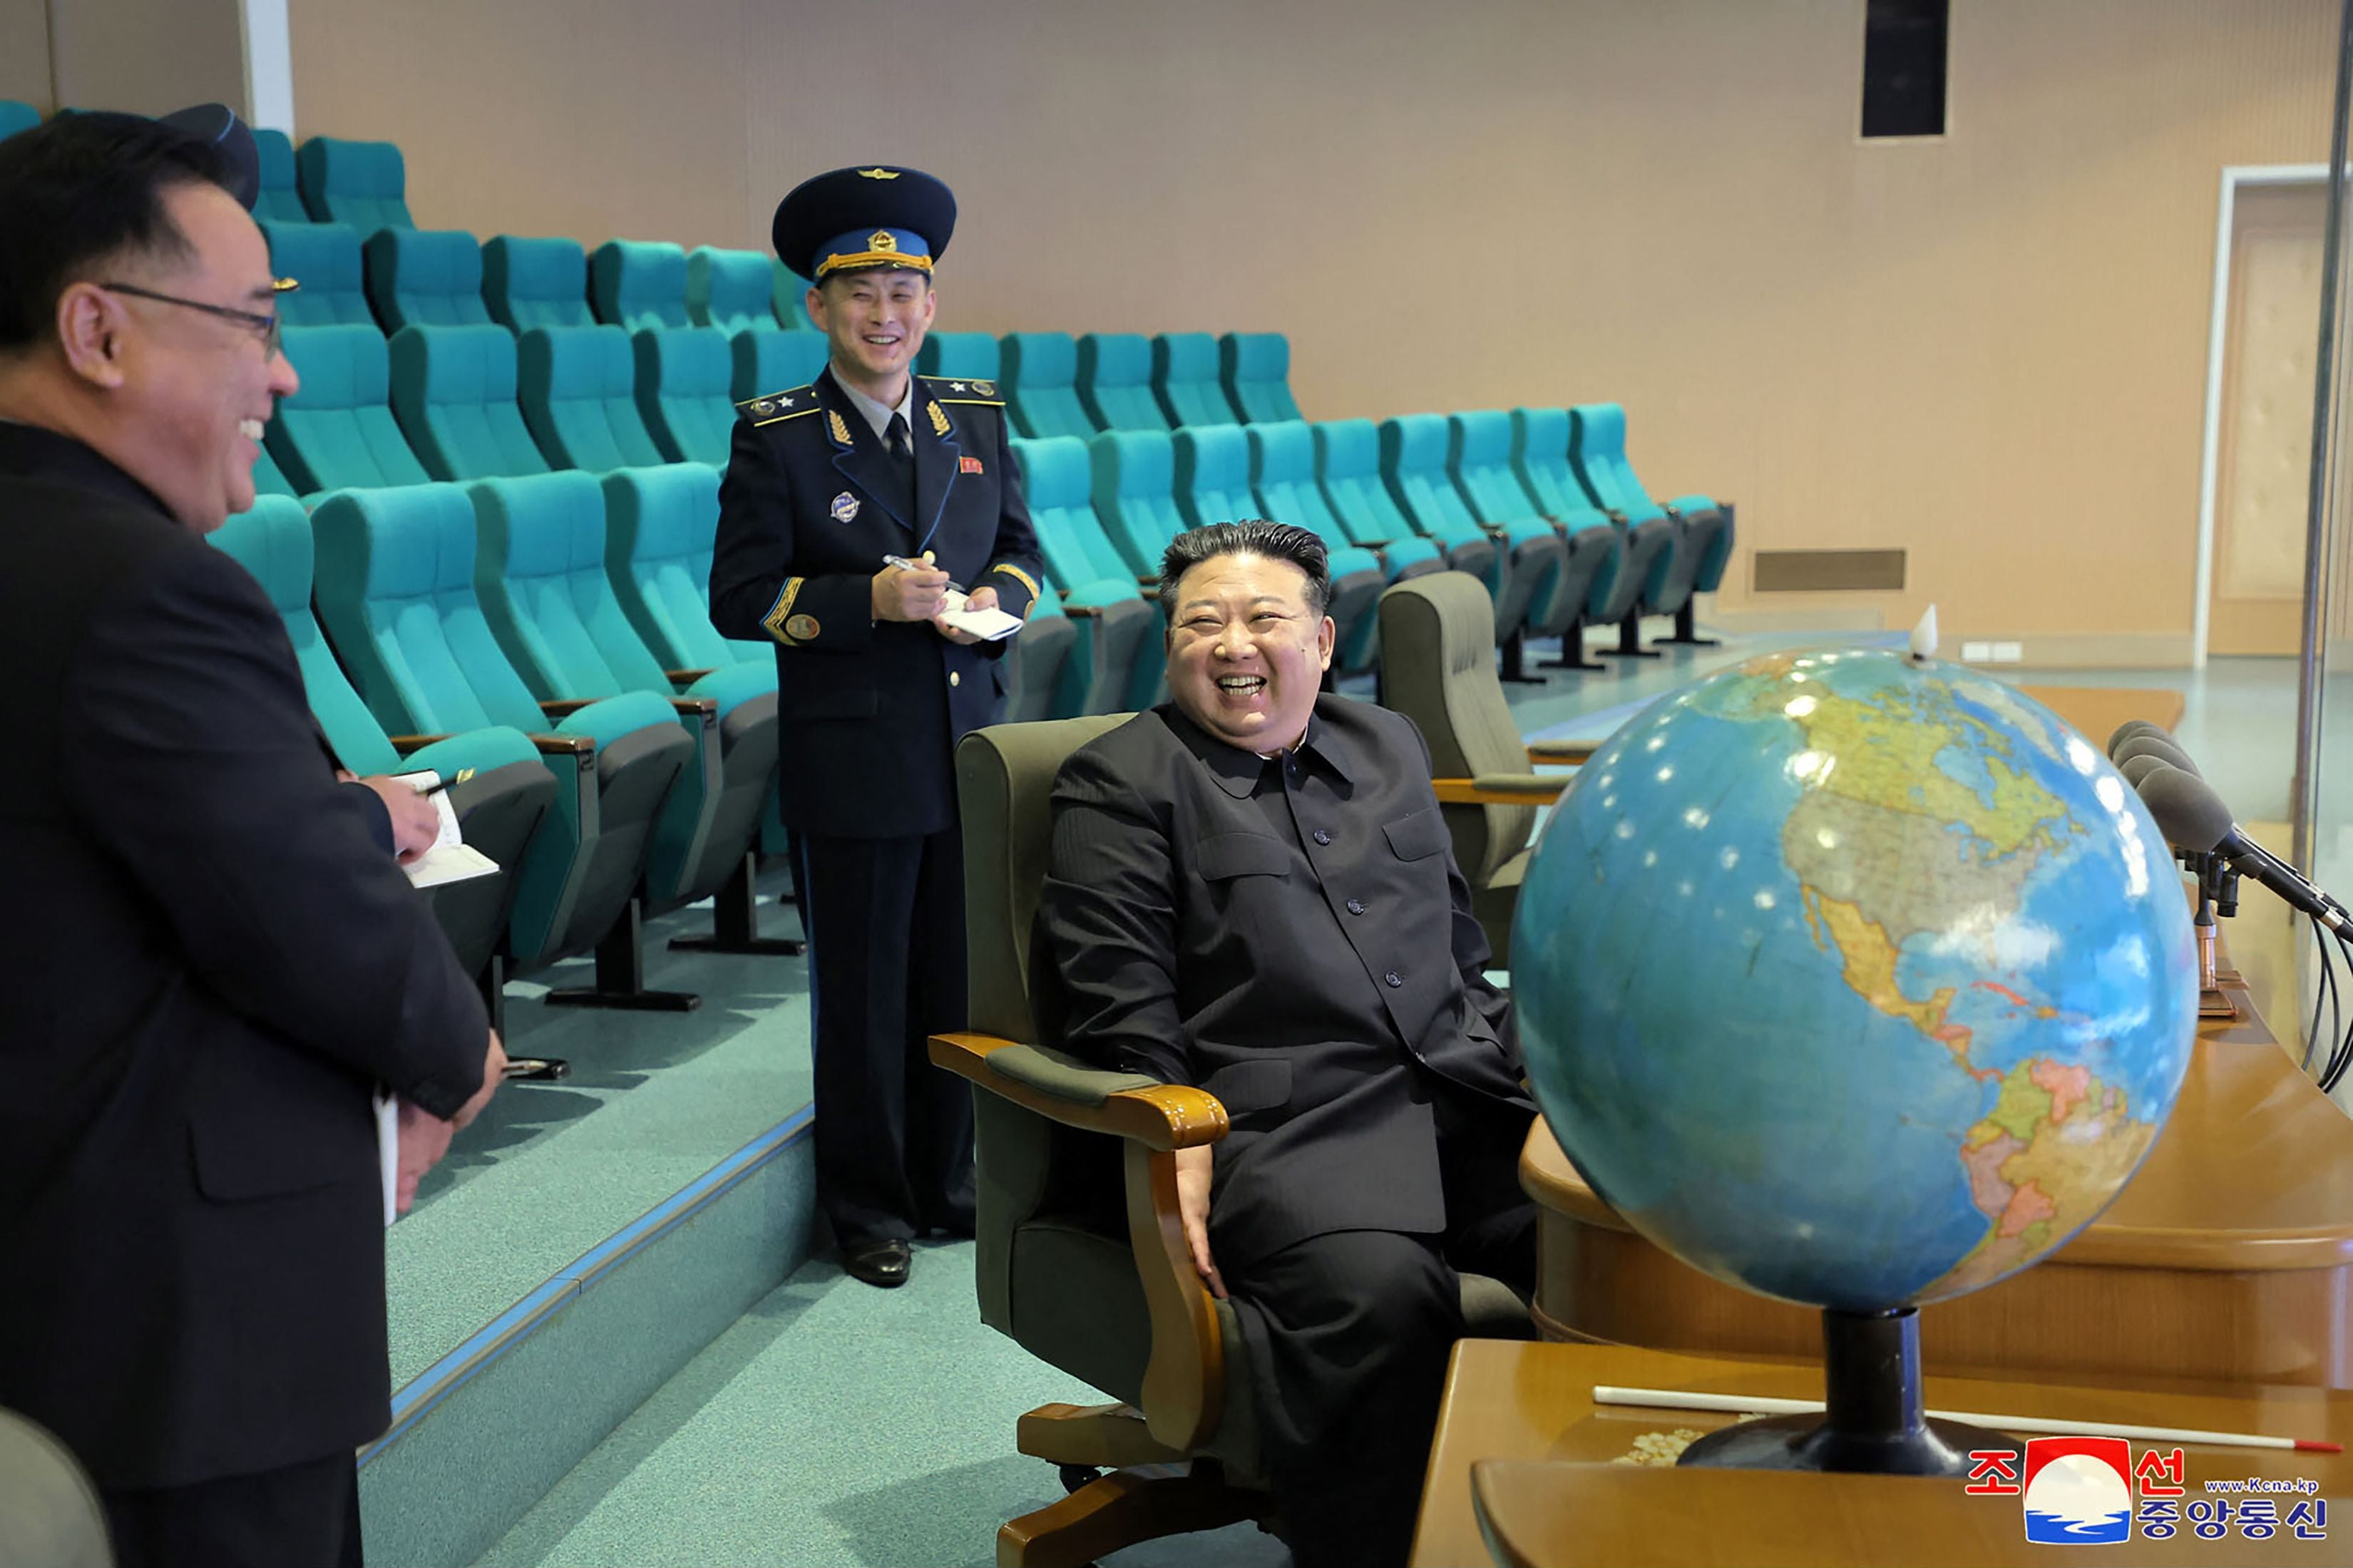 Kim Jong-un preparing for the launch of the reconnaissance satellite at the State Directorate of Aerospace Technology in Pyongyang on 24 November